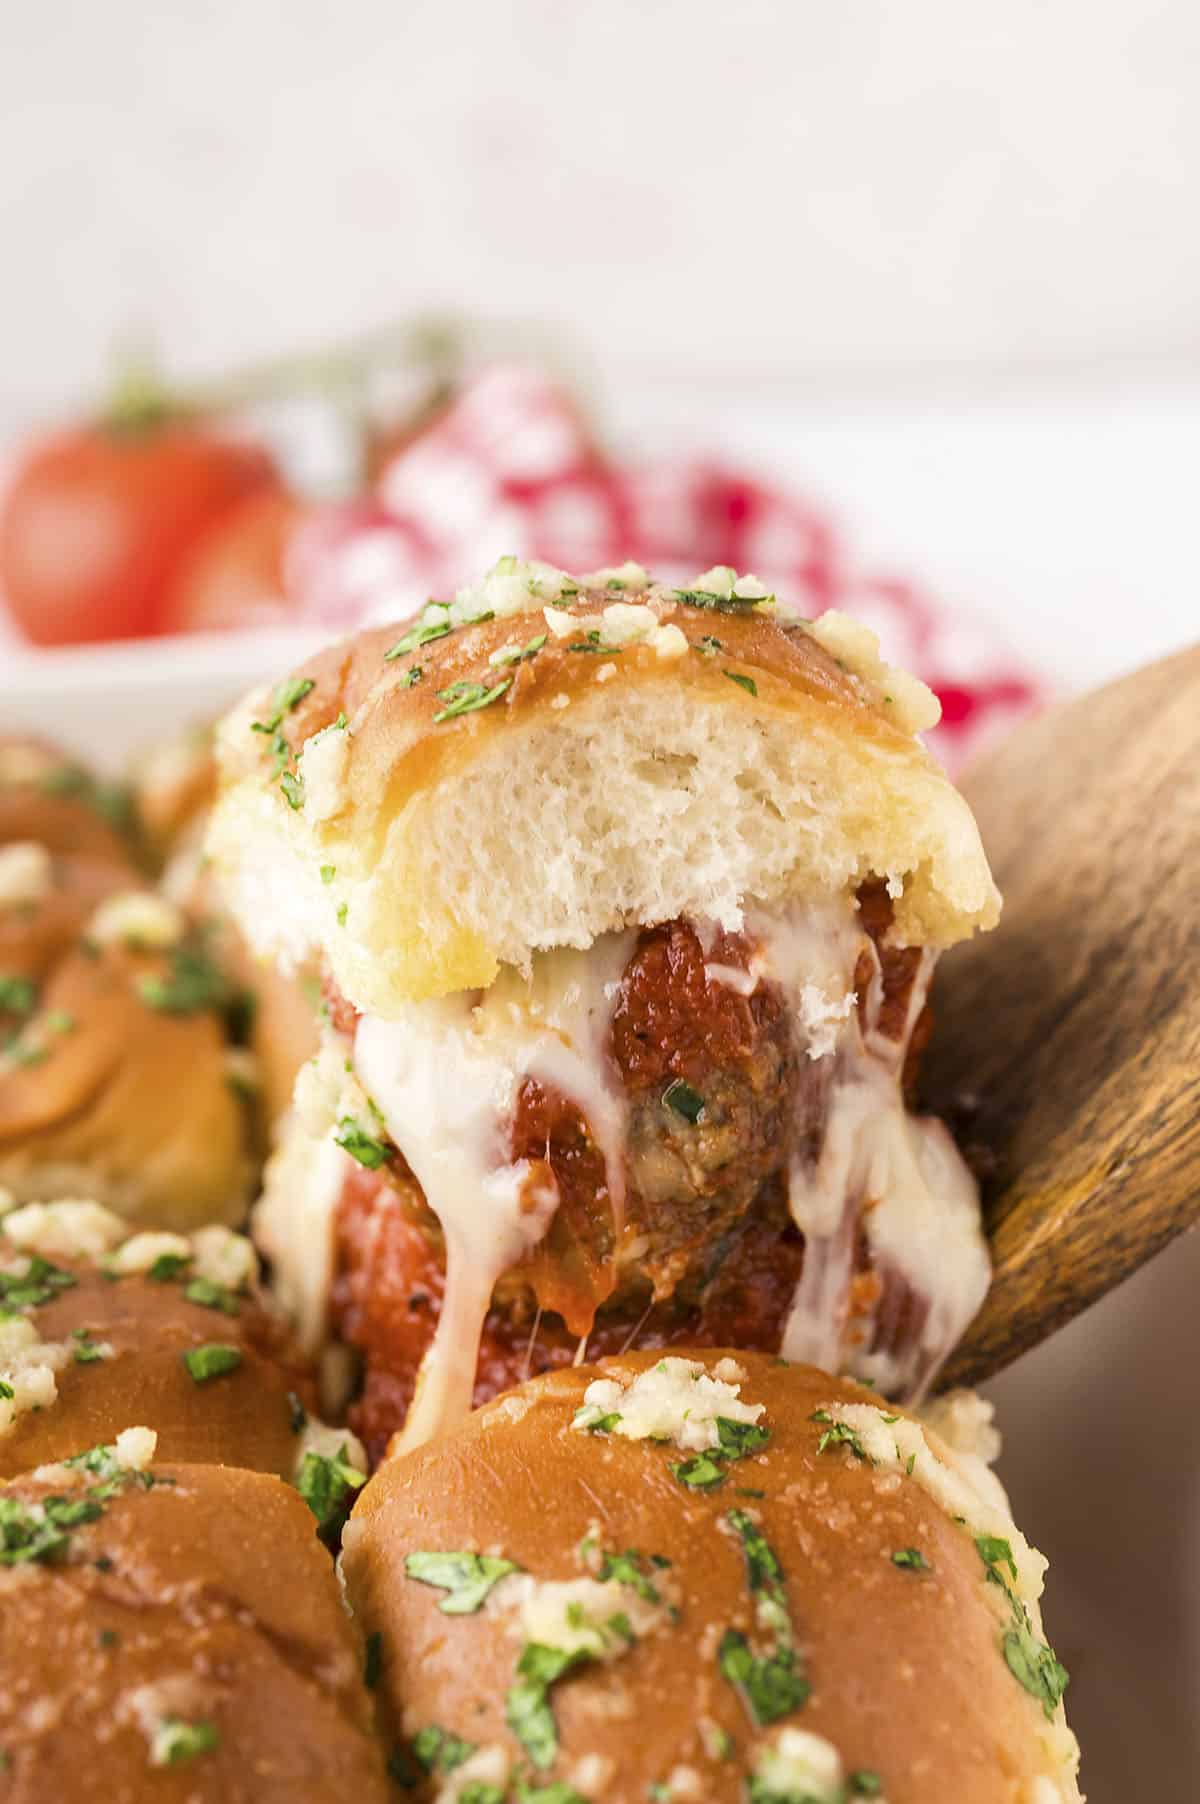 Meatball sliders being removed from pan.